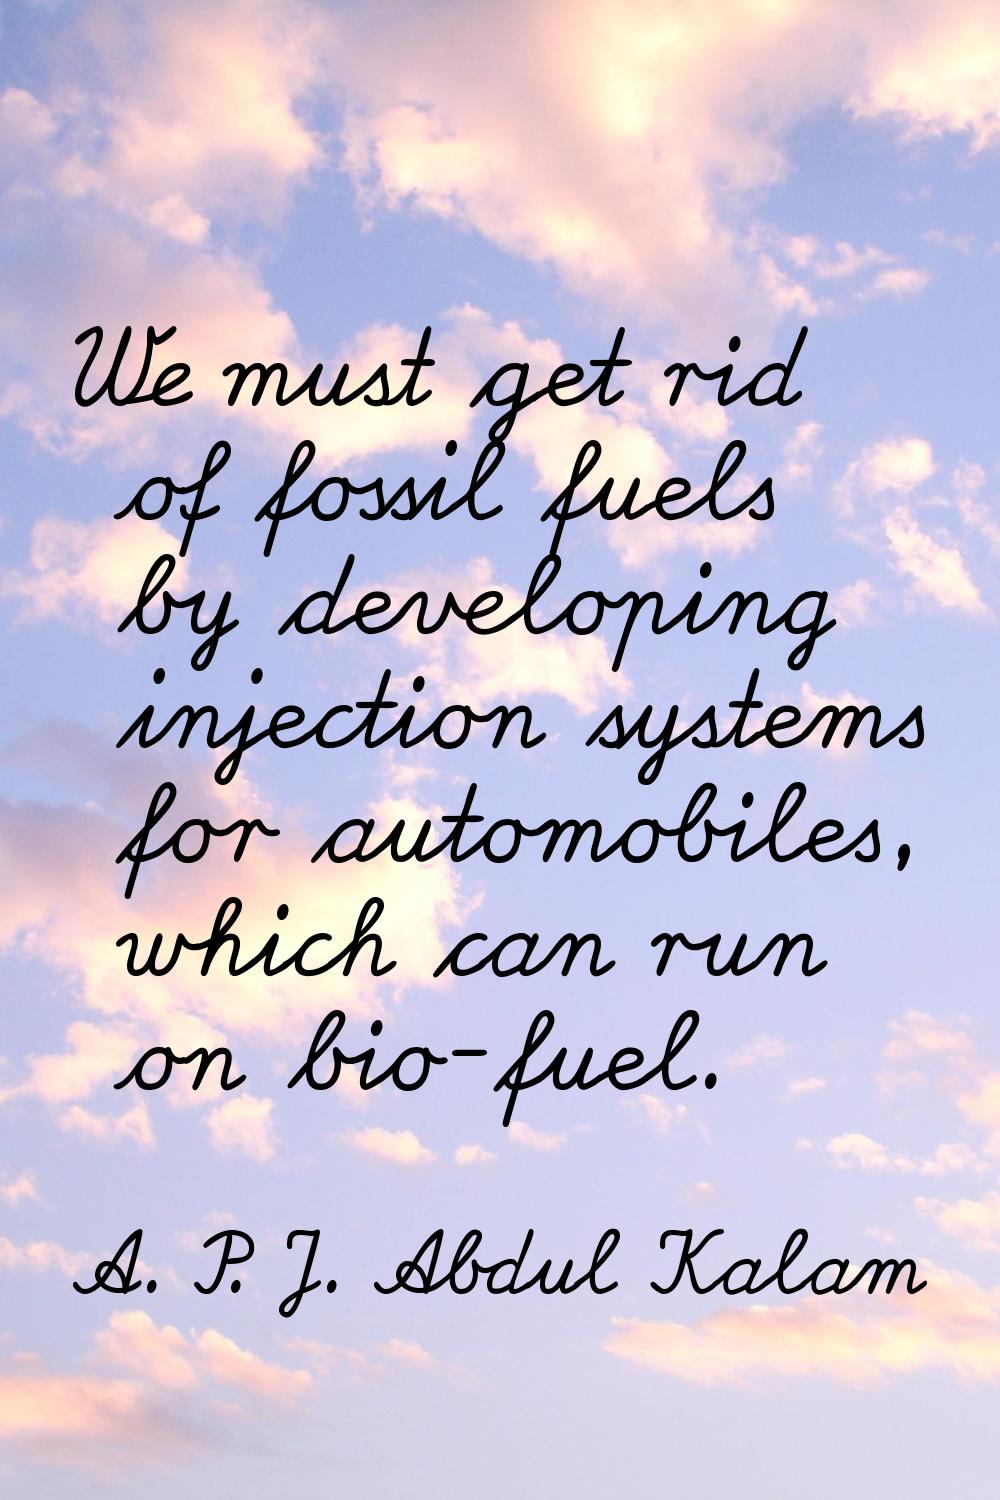 We must get rid of fossil fuels by developing injection systems for automobiles, which can run on b